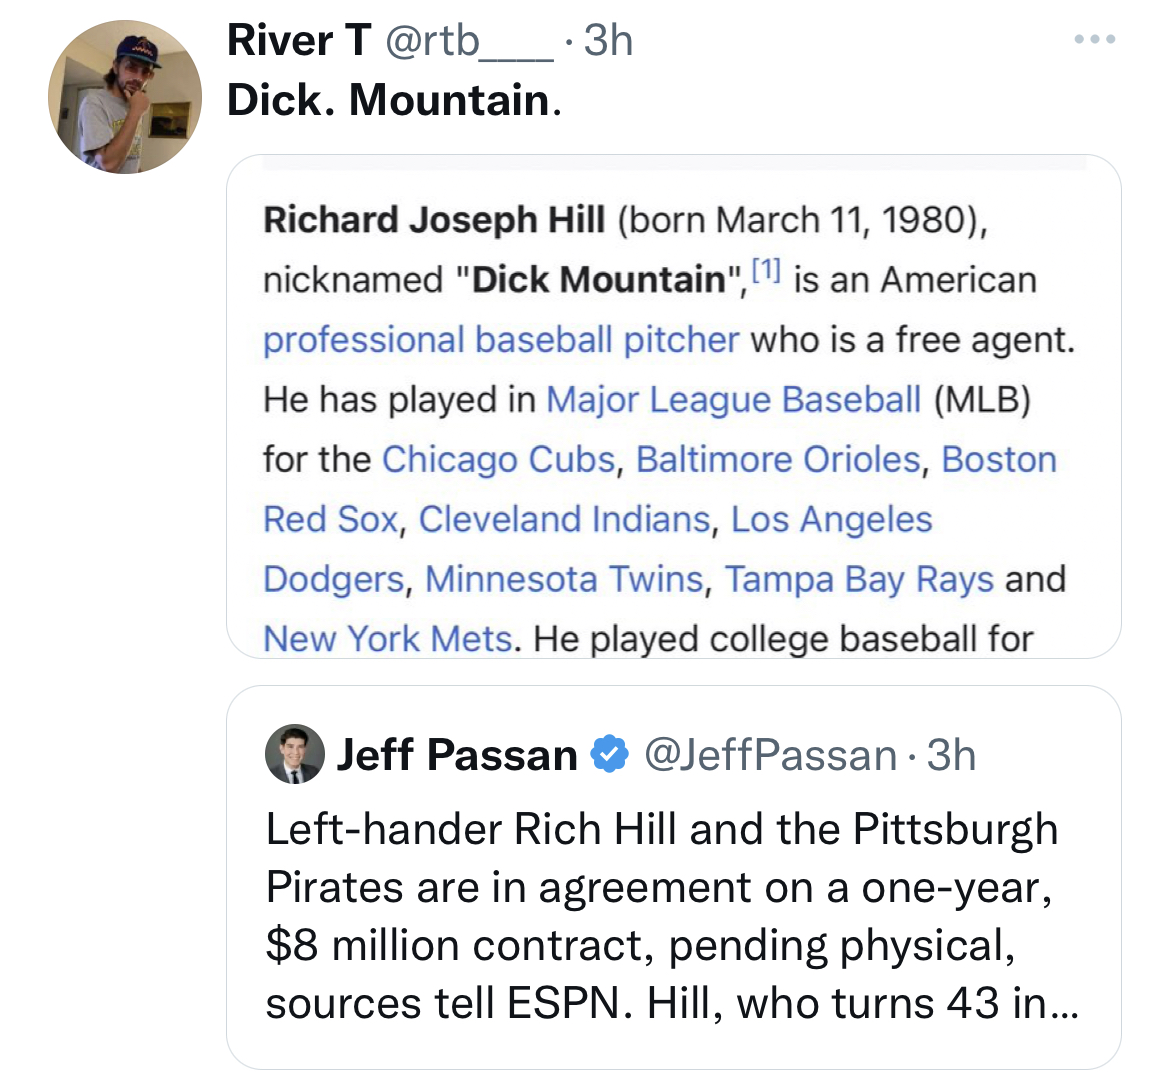 document - River T . 3h Dick. Mountain. Richard Joseph Hill born , nicknamed "Dick Mountain",1 is an American professional baseball pitcher who is a free agent. He has played in Major League Baseball Mlb for the Chicago Cubs, Baltimore Orioles, Boston Red